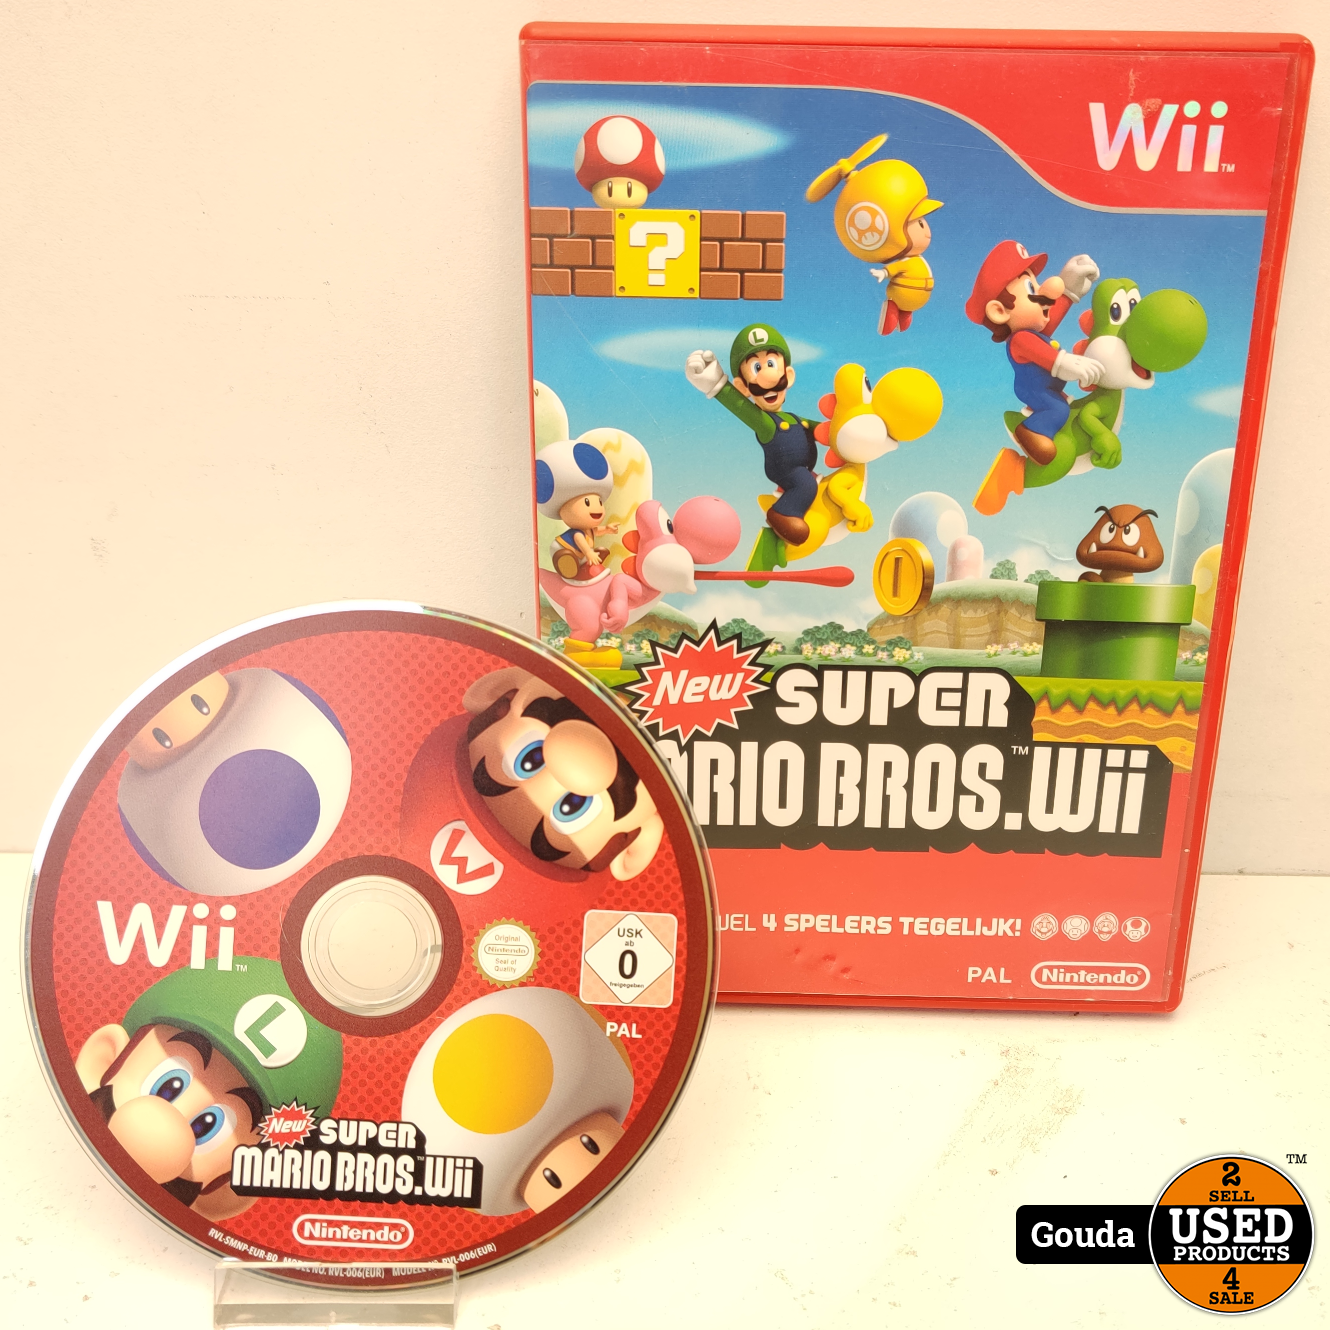 super bros wii - Used Products Gouda